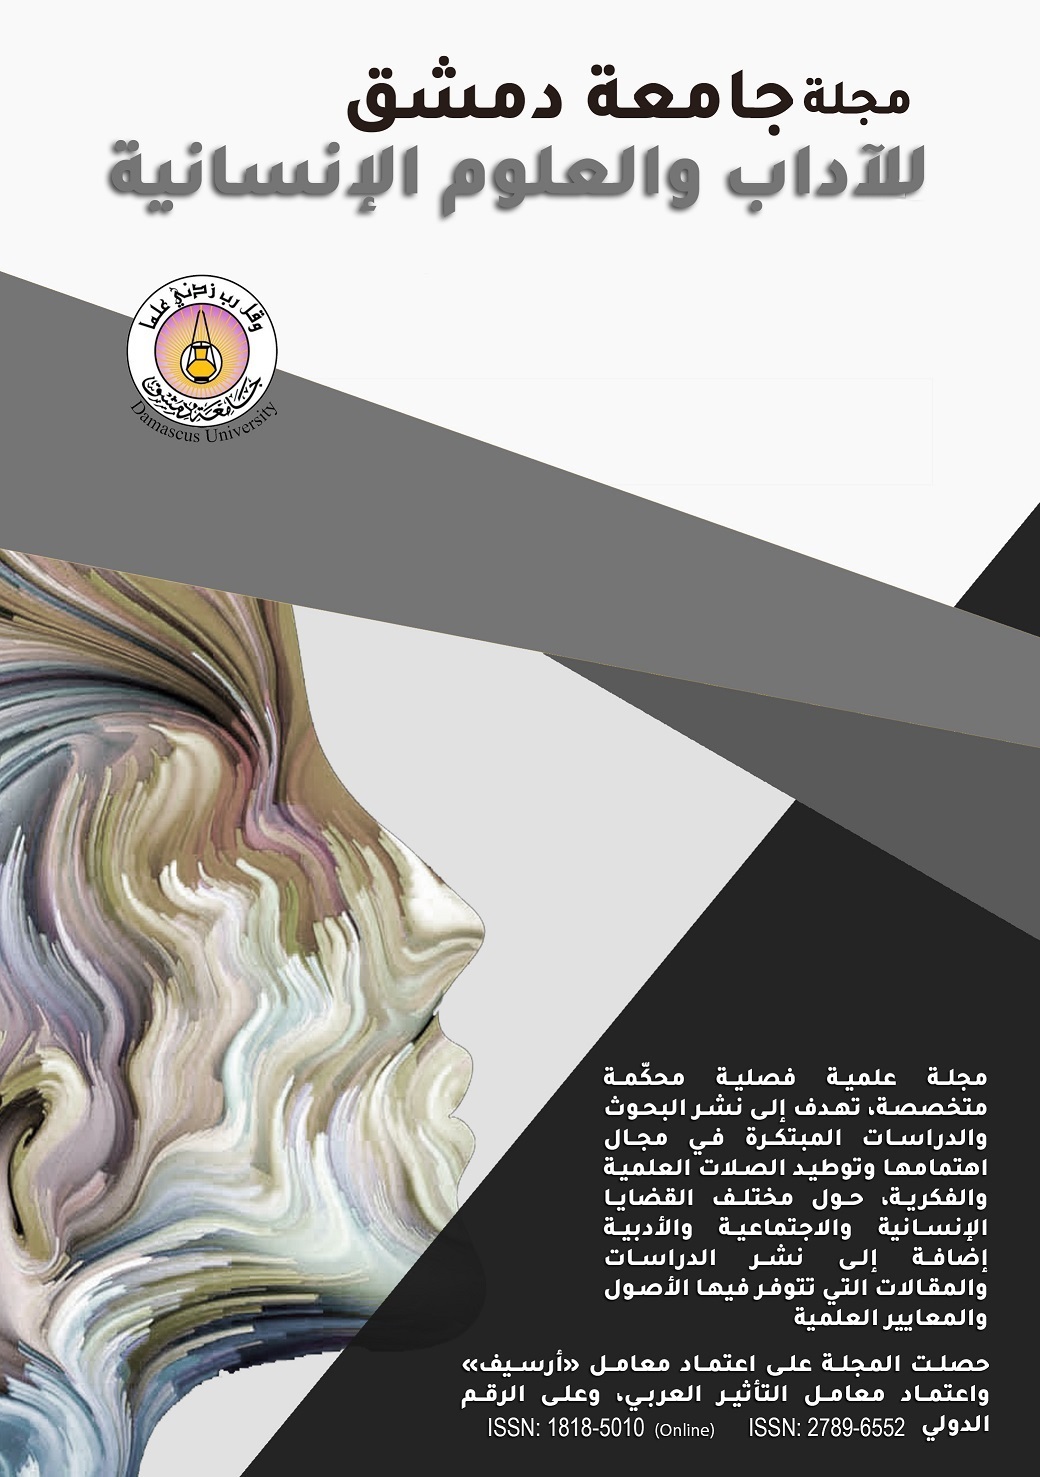 					View Vol. 36 No. 2 (2020):  Damascus University Journal of Arts And Humanities
				